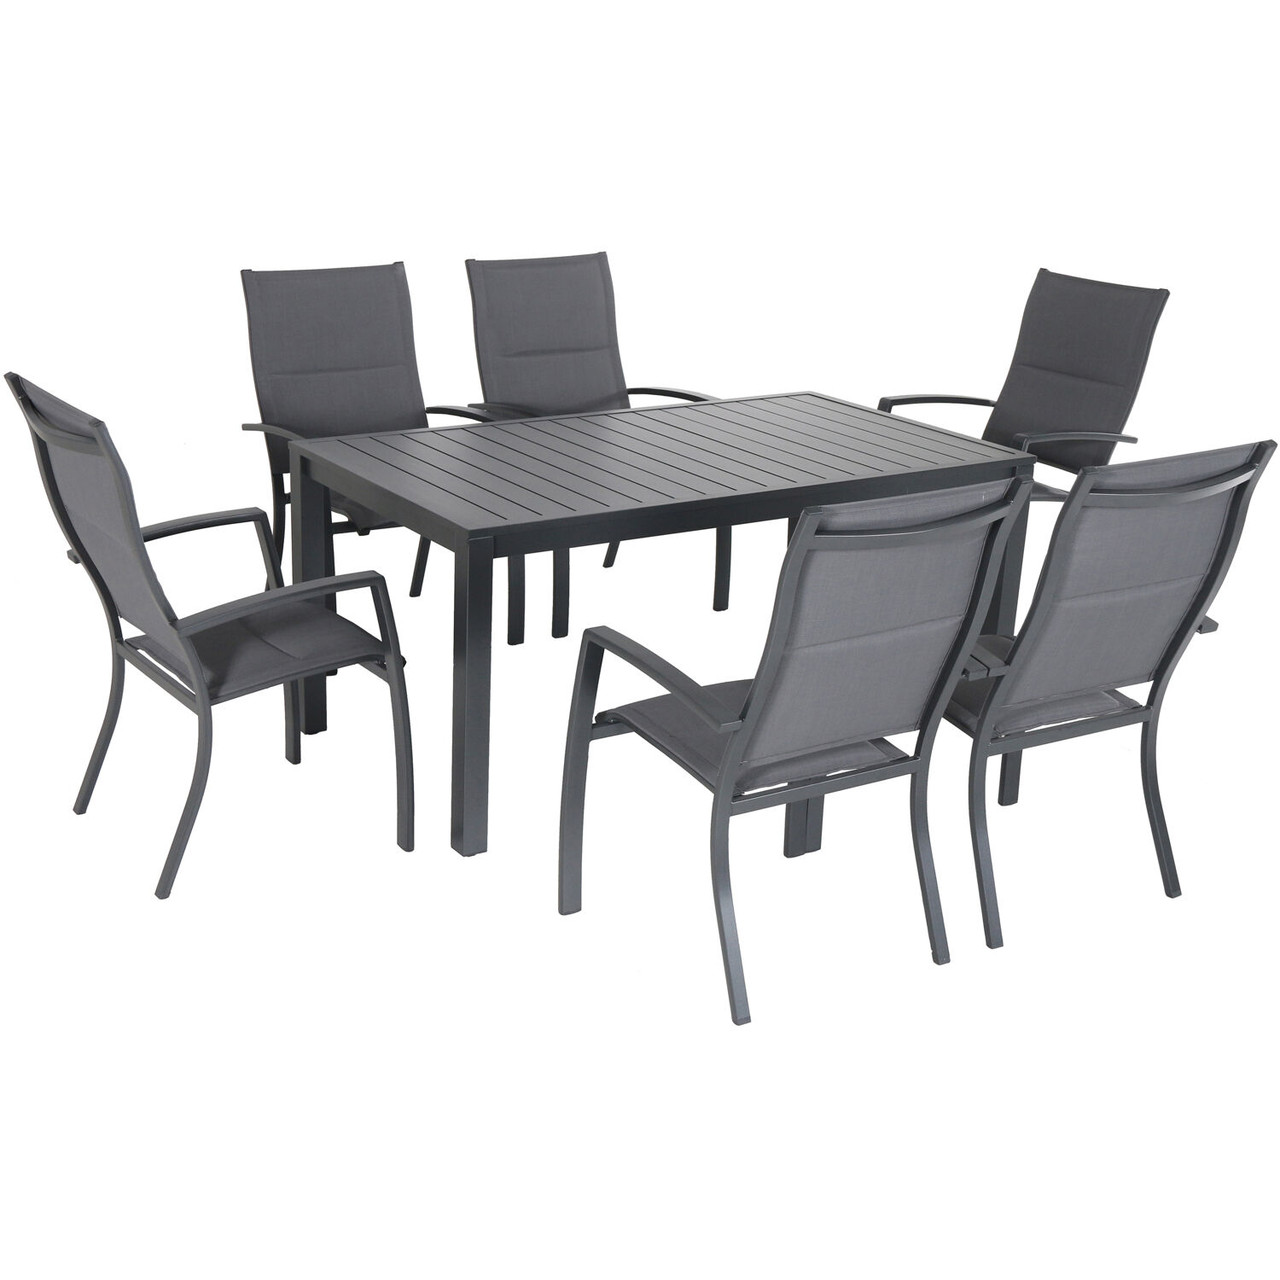 Naples 7-Piece Outdoor Dining Set with 6 Padded Sling Chairs in Gray and a  63" x 35" Dining Table - Hanover Home